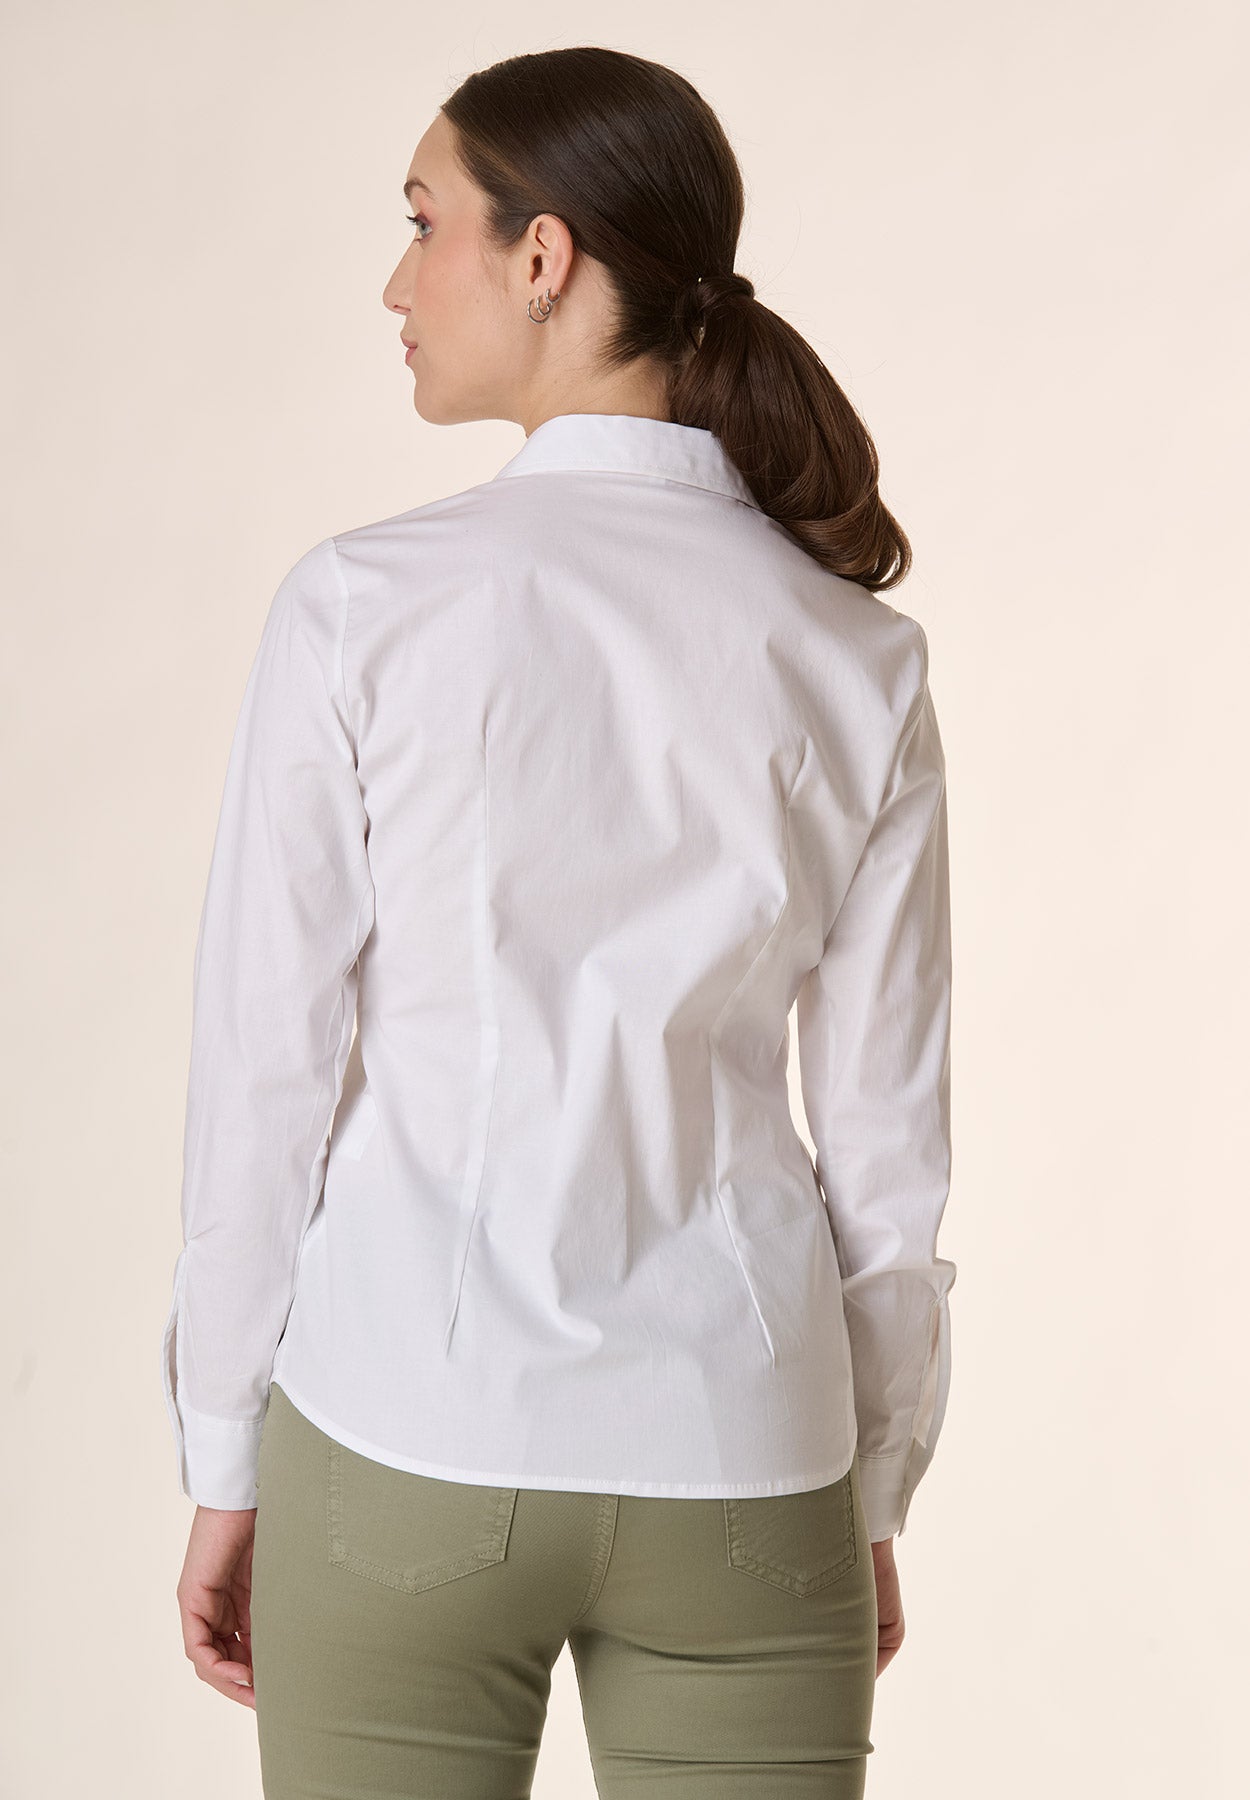 White stretch cotton shirt long sleeves